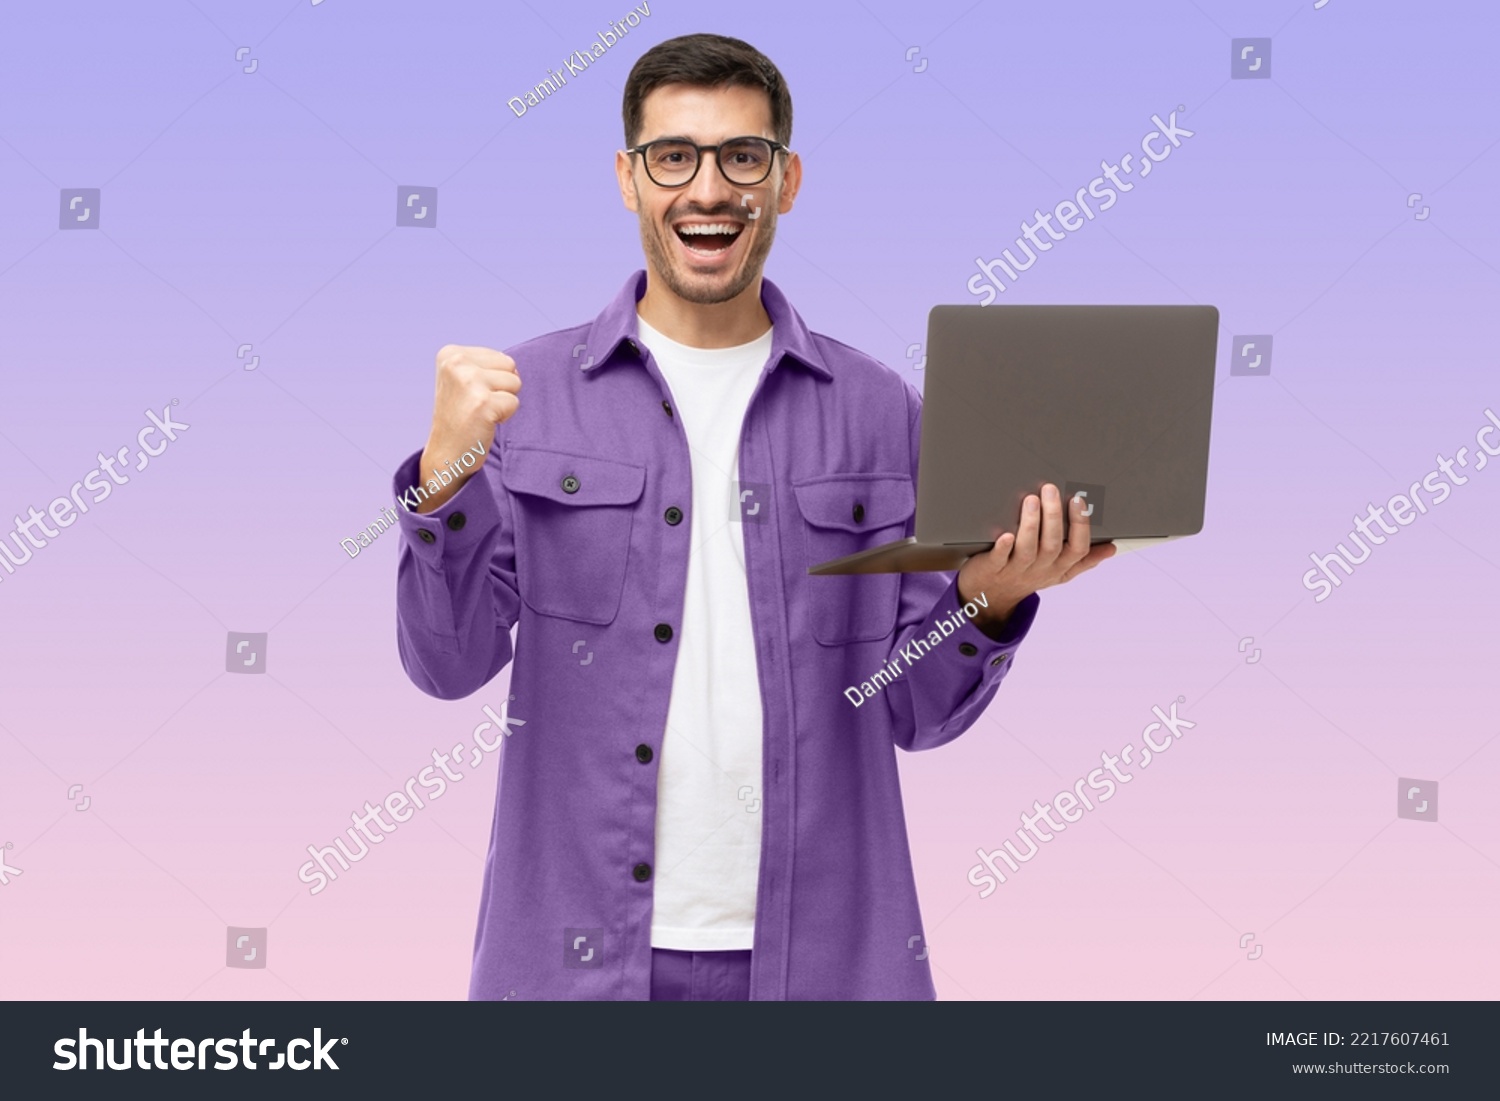 He's a winner! Happy young man in purple shirt looking at laptop screen with victory expression, isolated on purple background #2217607461